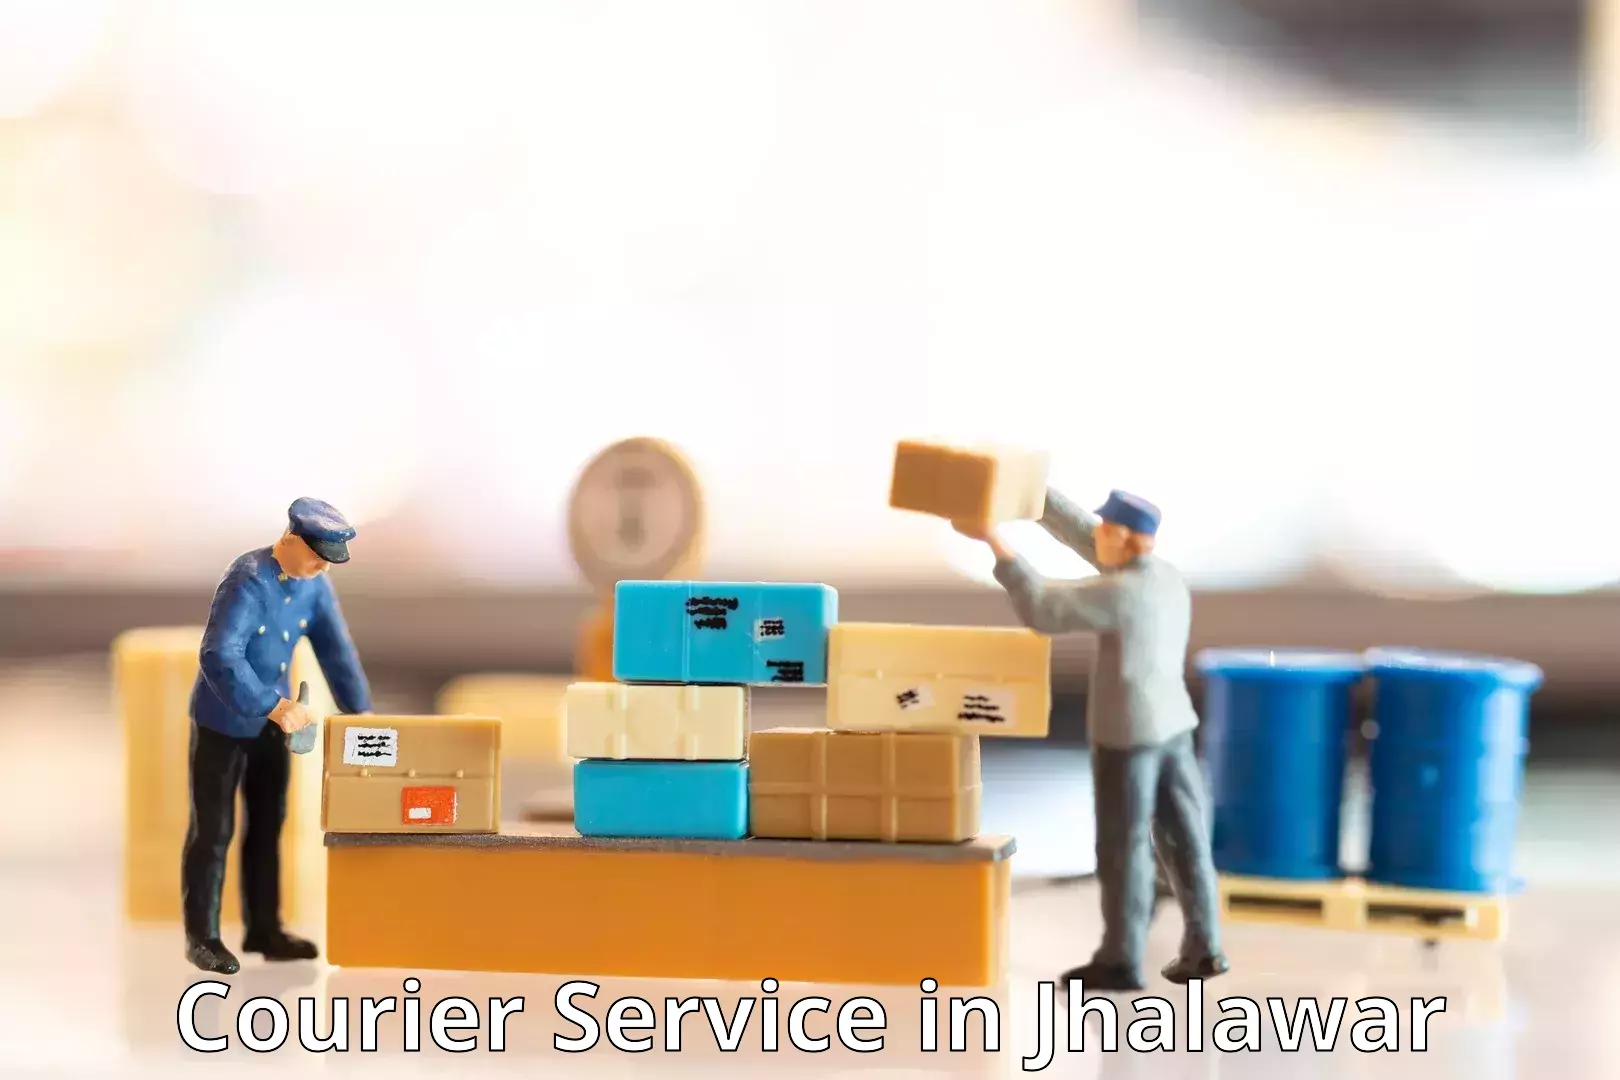 Efficient shipping operations in Jhalawar